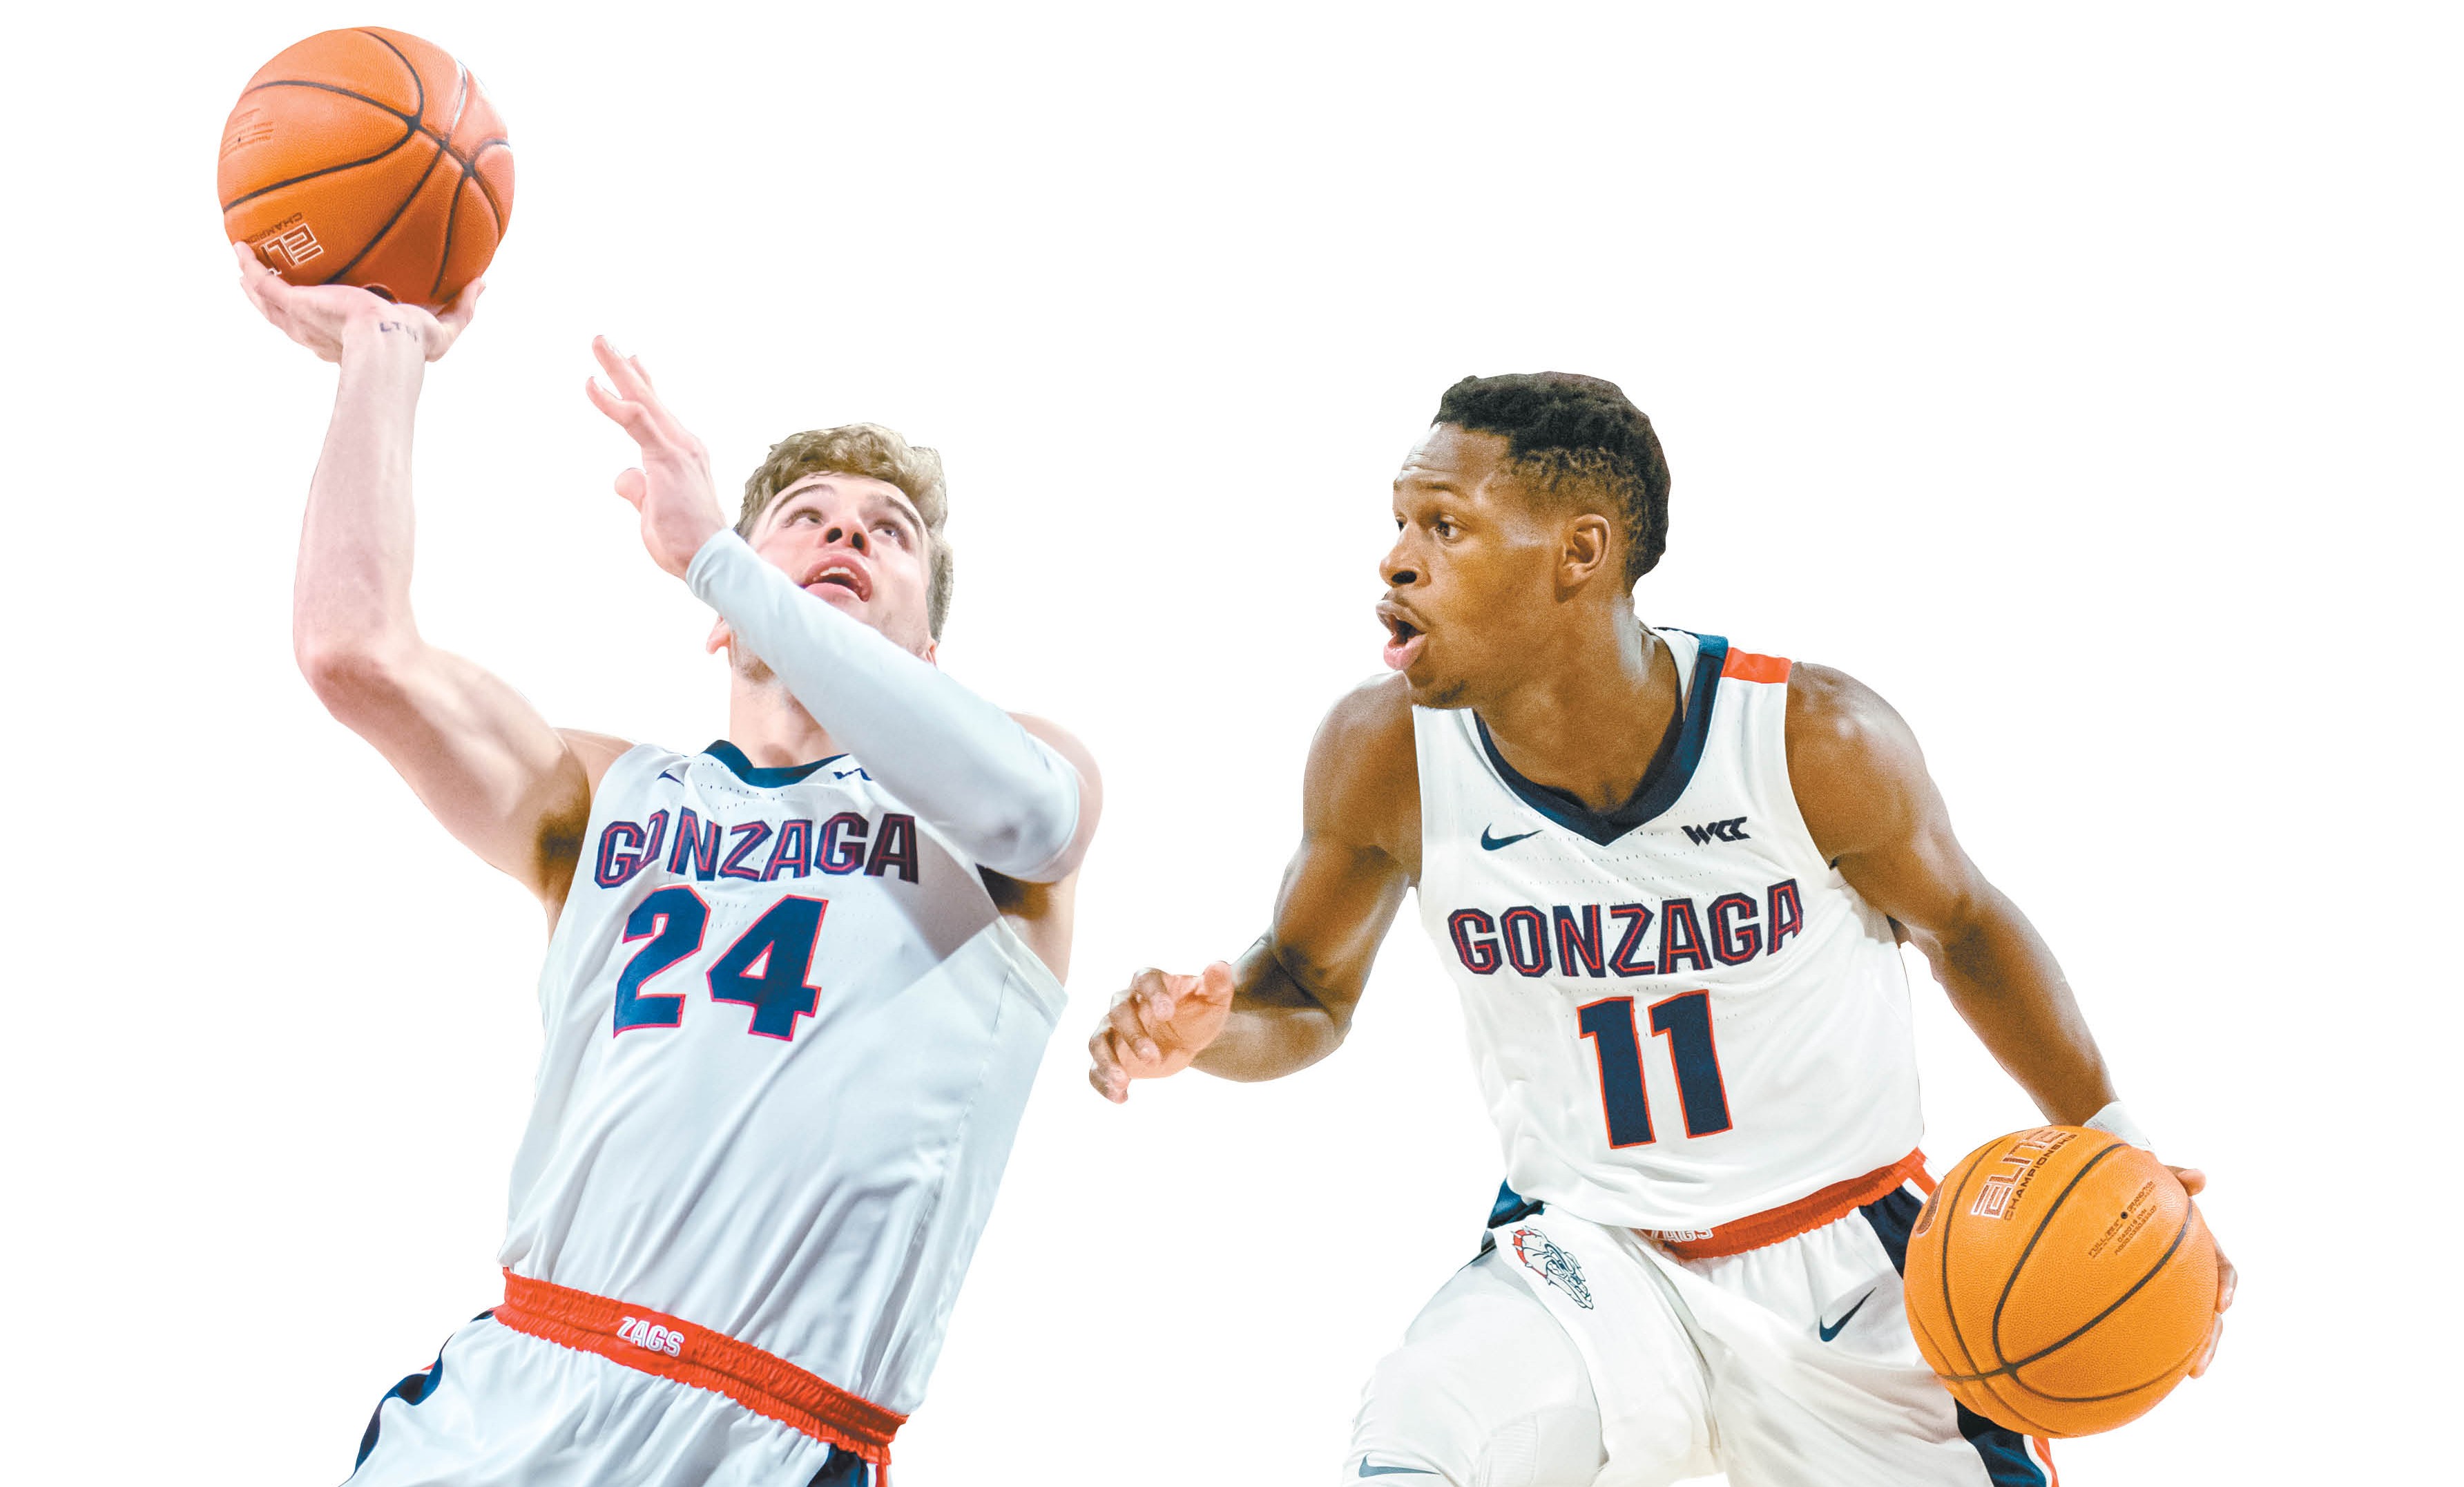 After an abrupt end to last season, the region's college basketball teams look to make the unusual 2020-21 season unforgettable as well